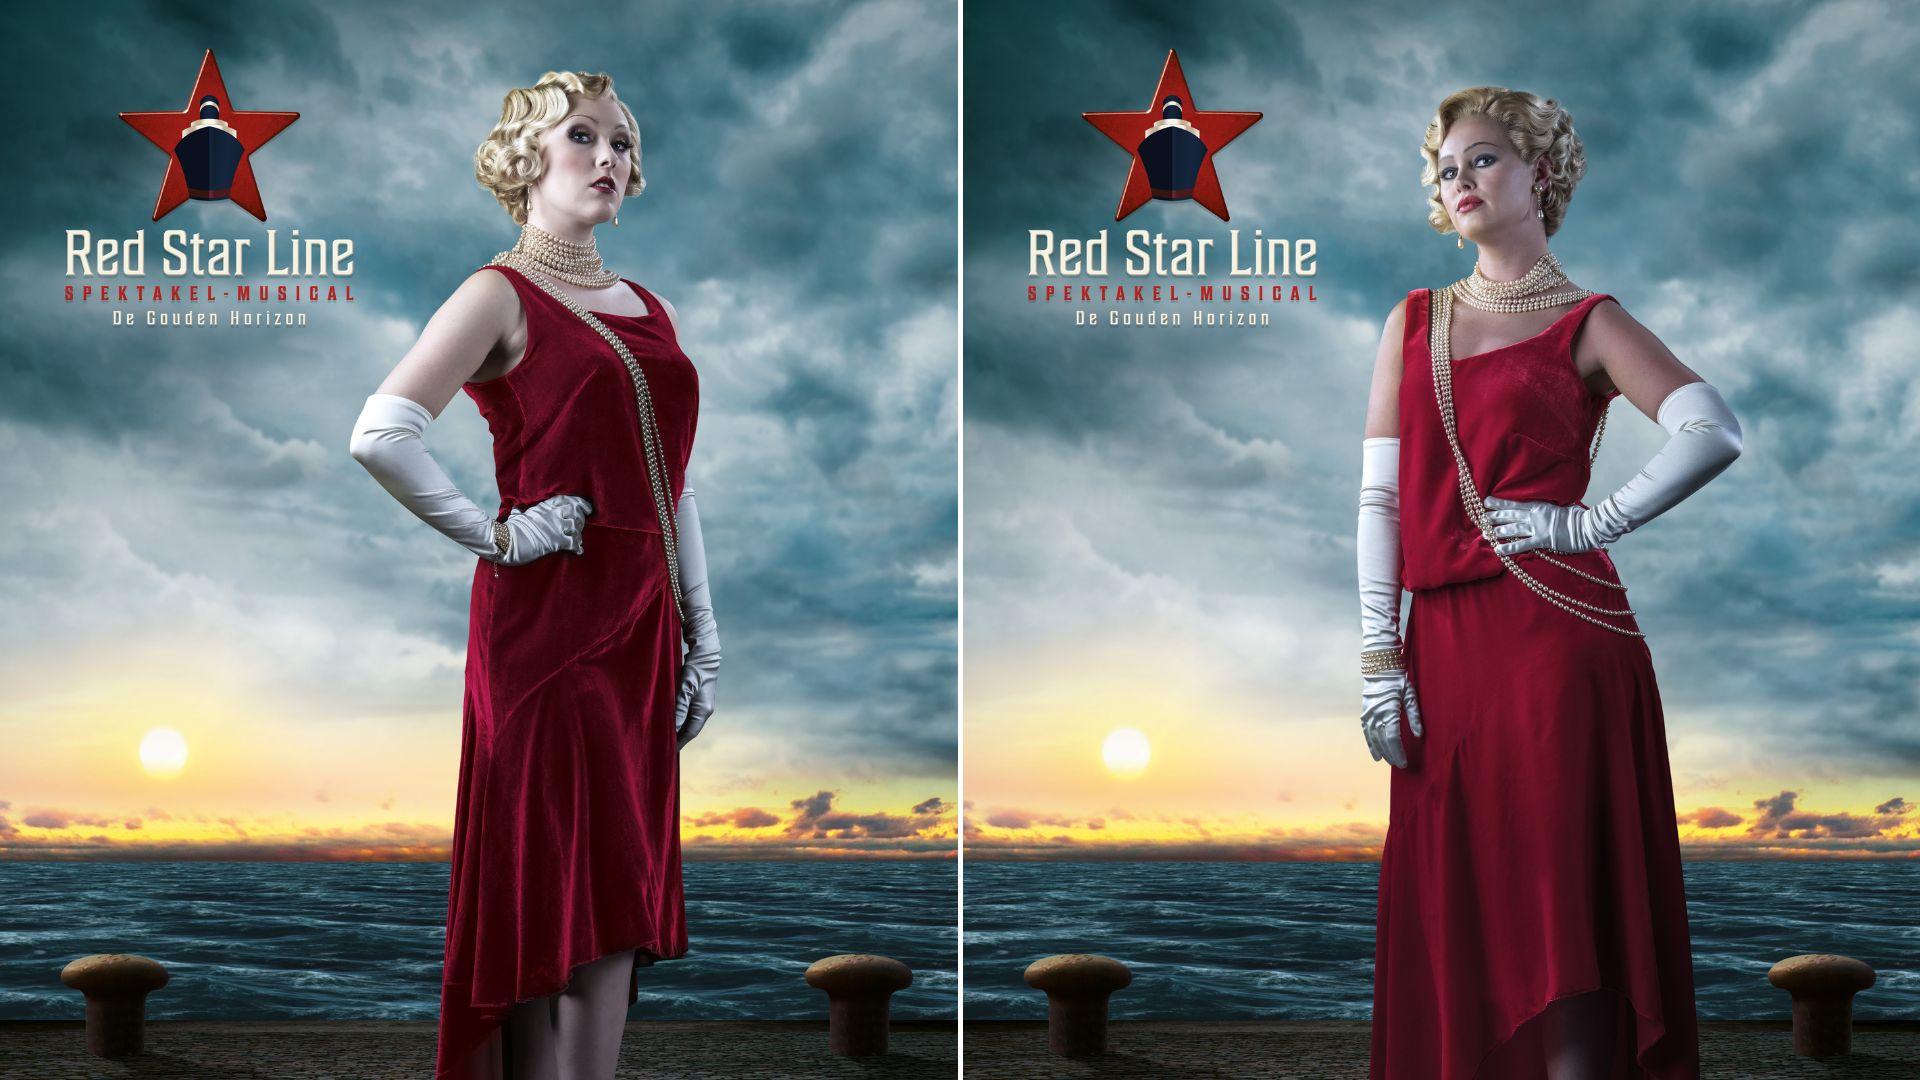 Red Star Line musical